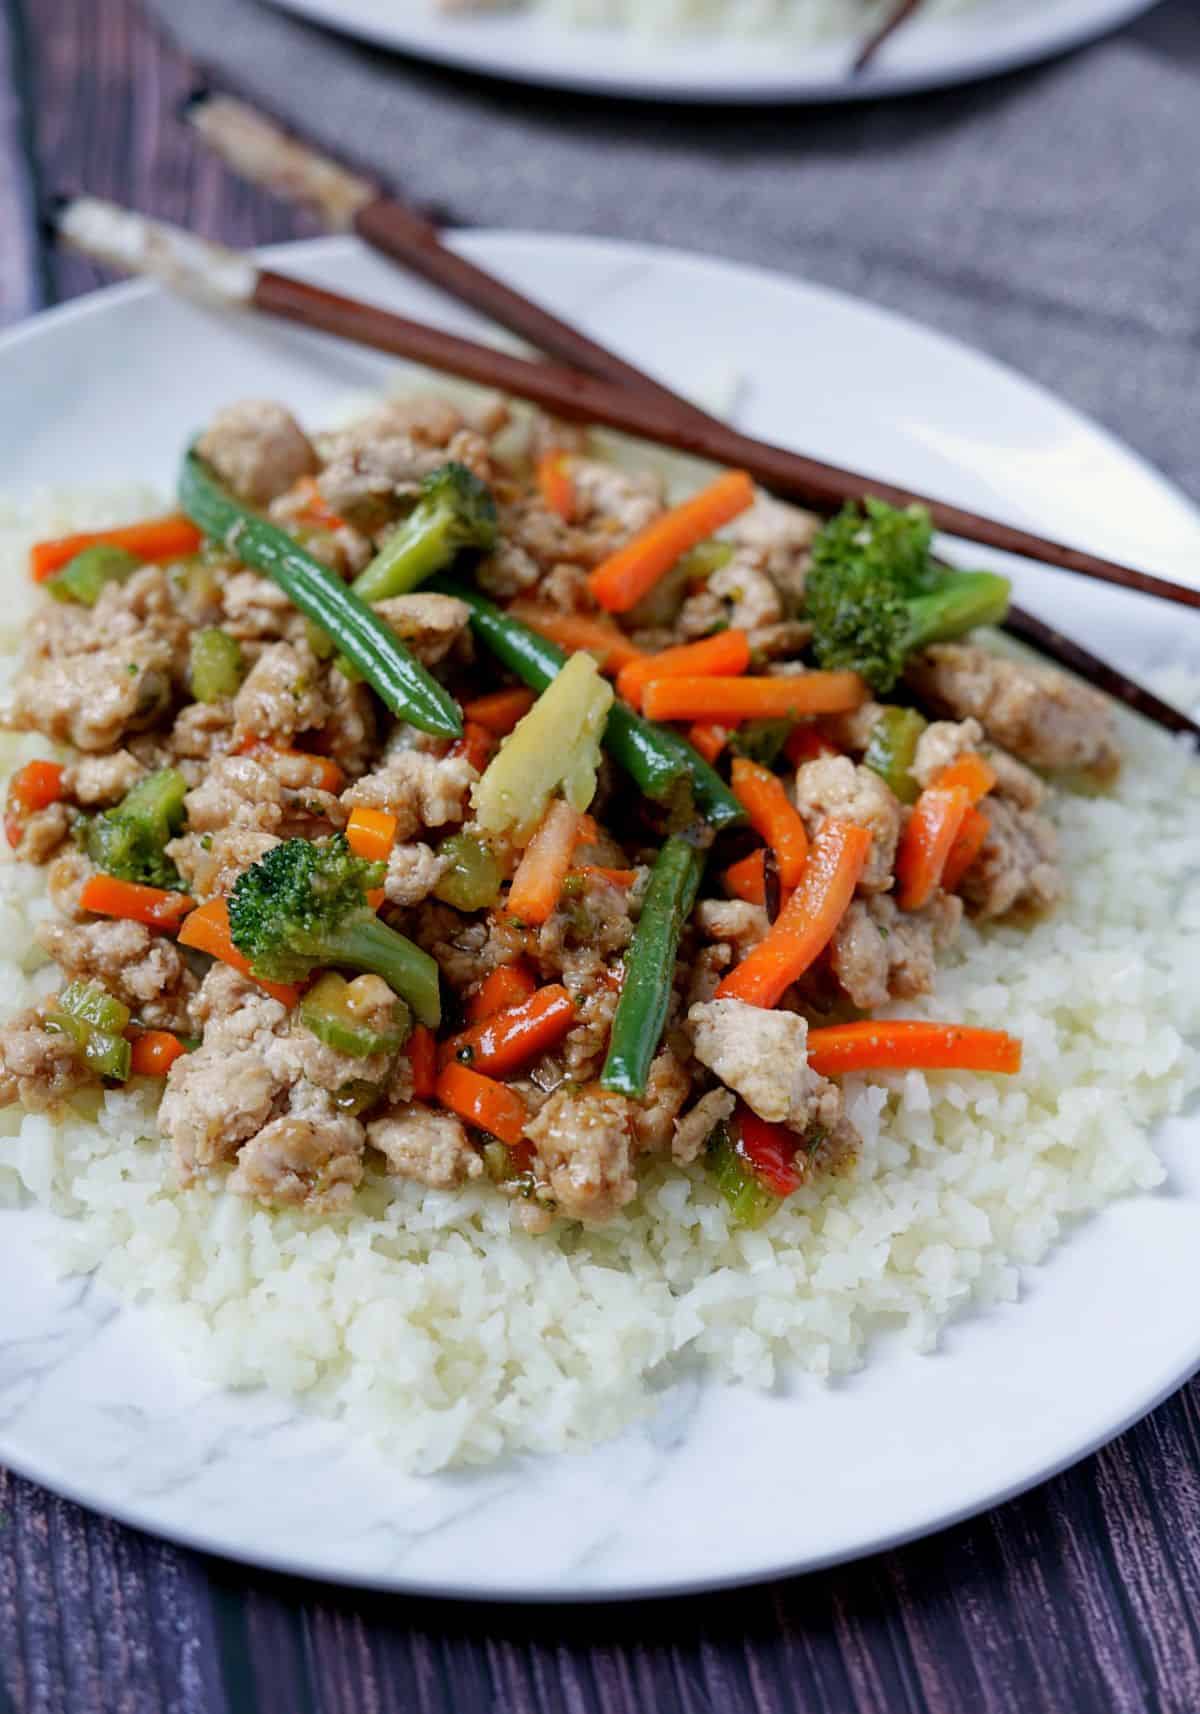 Plate of ground chicken stir fry on a towel with chopsticks.